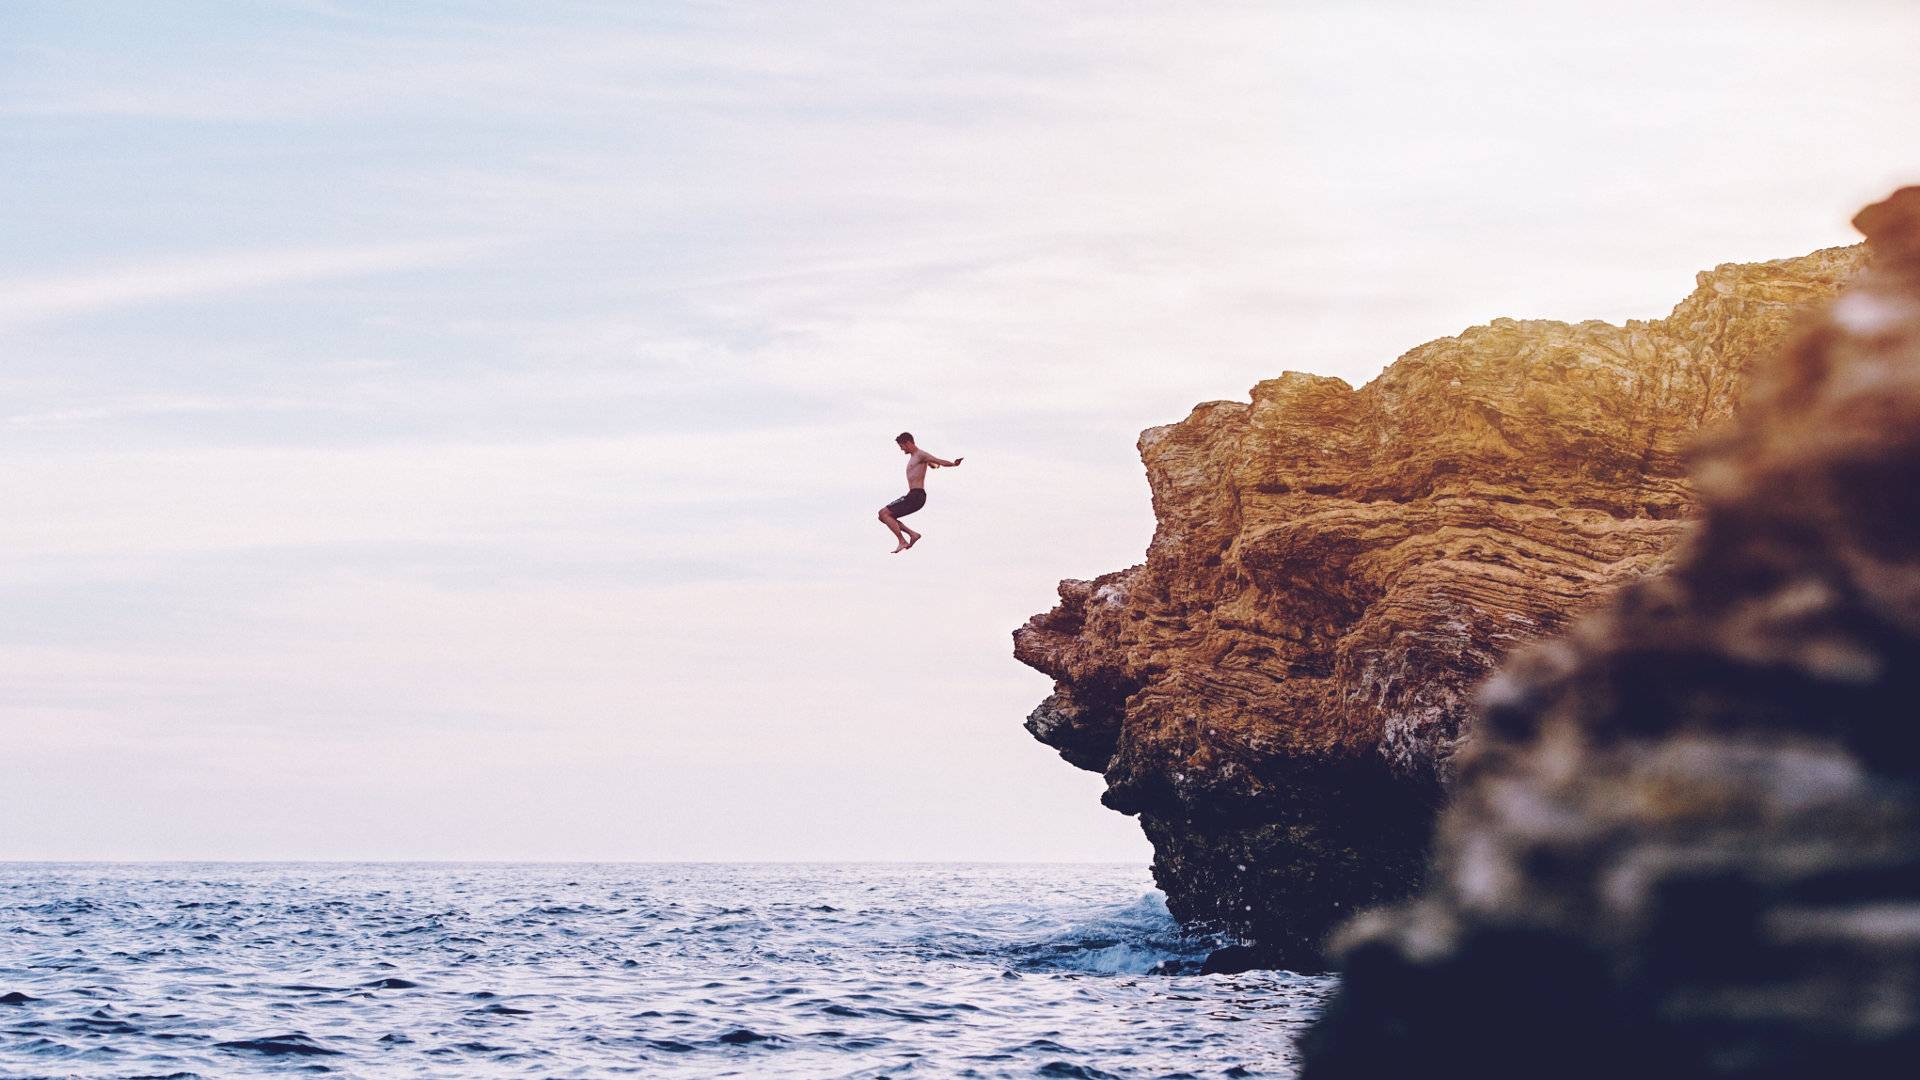 Man jumping into sea off a high cliff rock